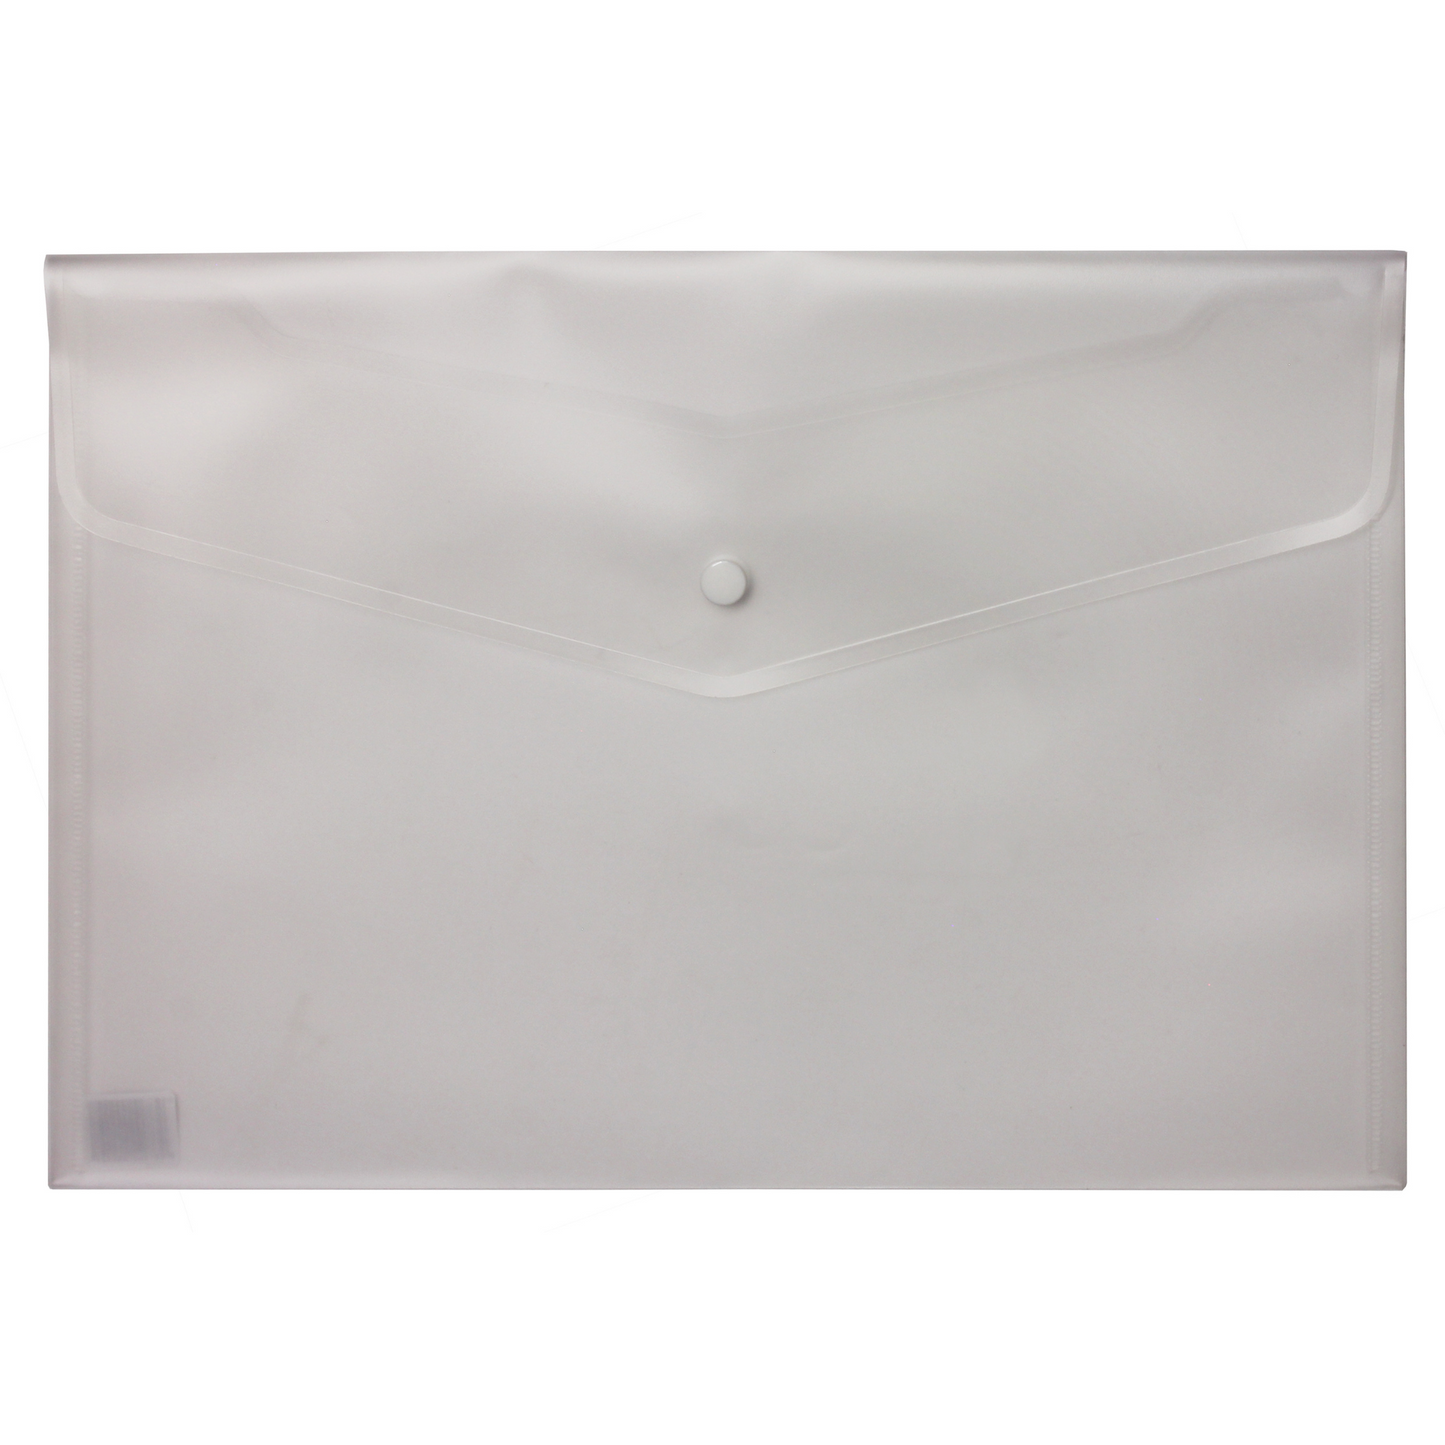 Clear A4-sized plastic stud wallet with a snap-button closure, displayed against a white background.